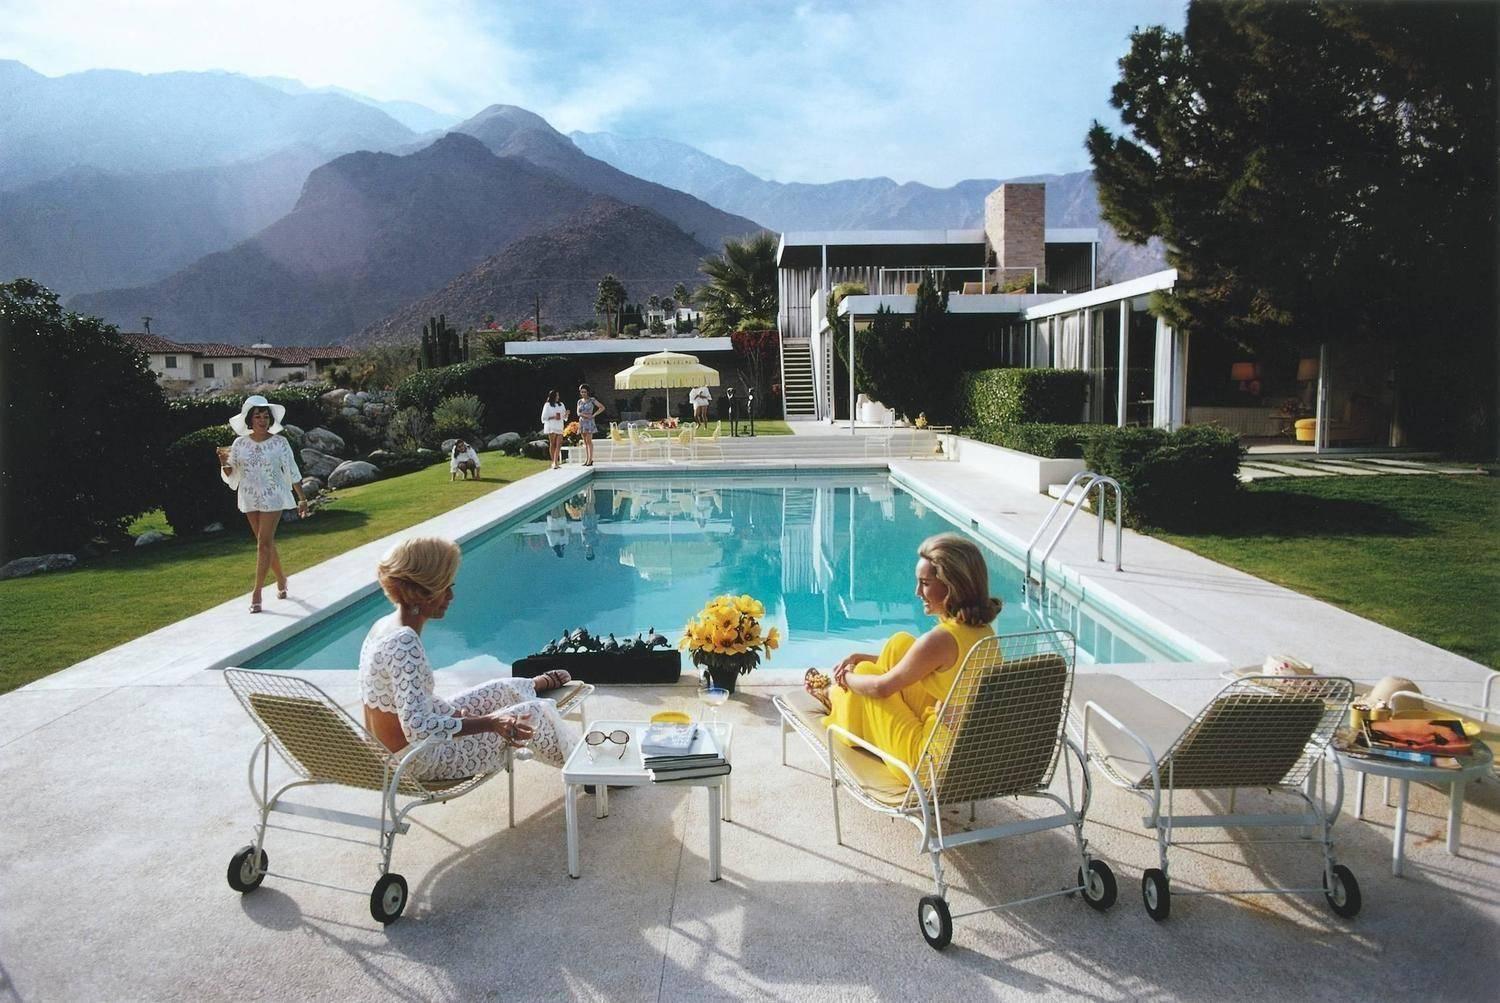 A desert house in Palm Springs designed by Richard Neutra for Edgar Kaufman. Lita Baron approaches Nelda Linsk, right, wife of art dealer Joseph Linsk who is talking to a friend, Helen Dzo Dzo.

Estate editon of 150 with certificate of authenticity